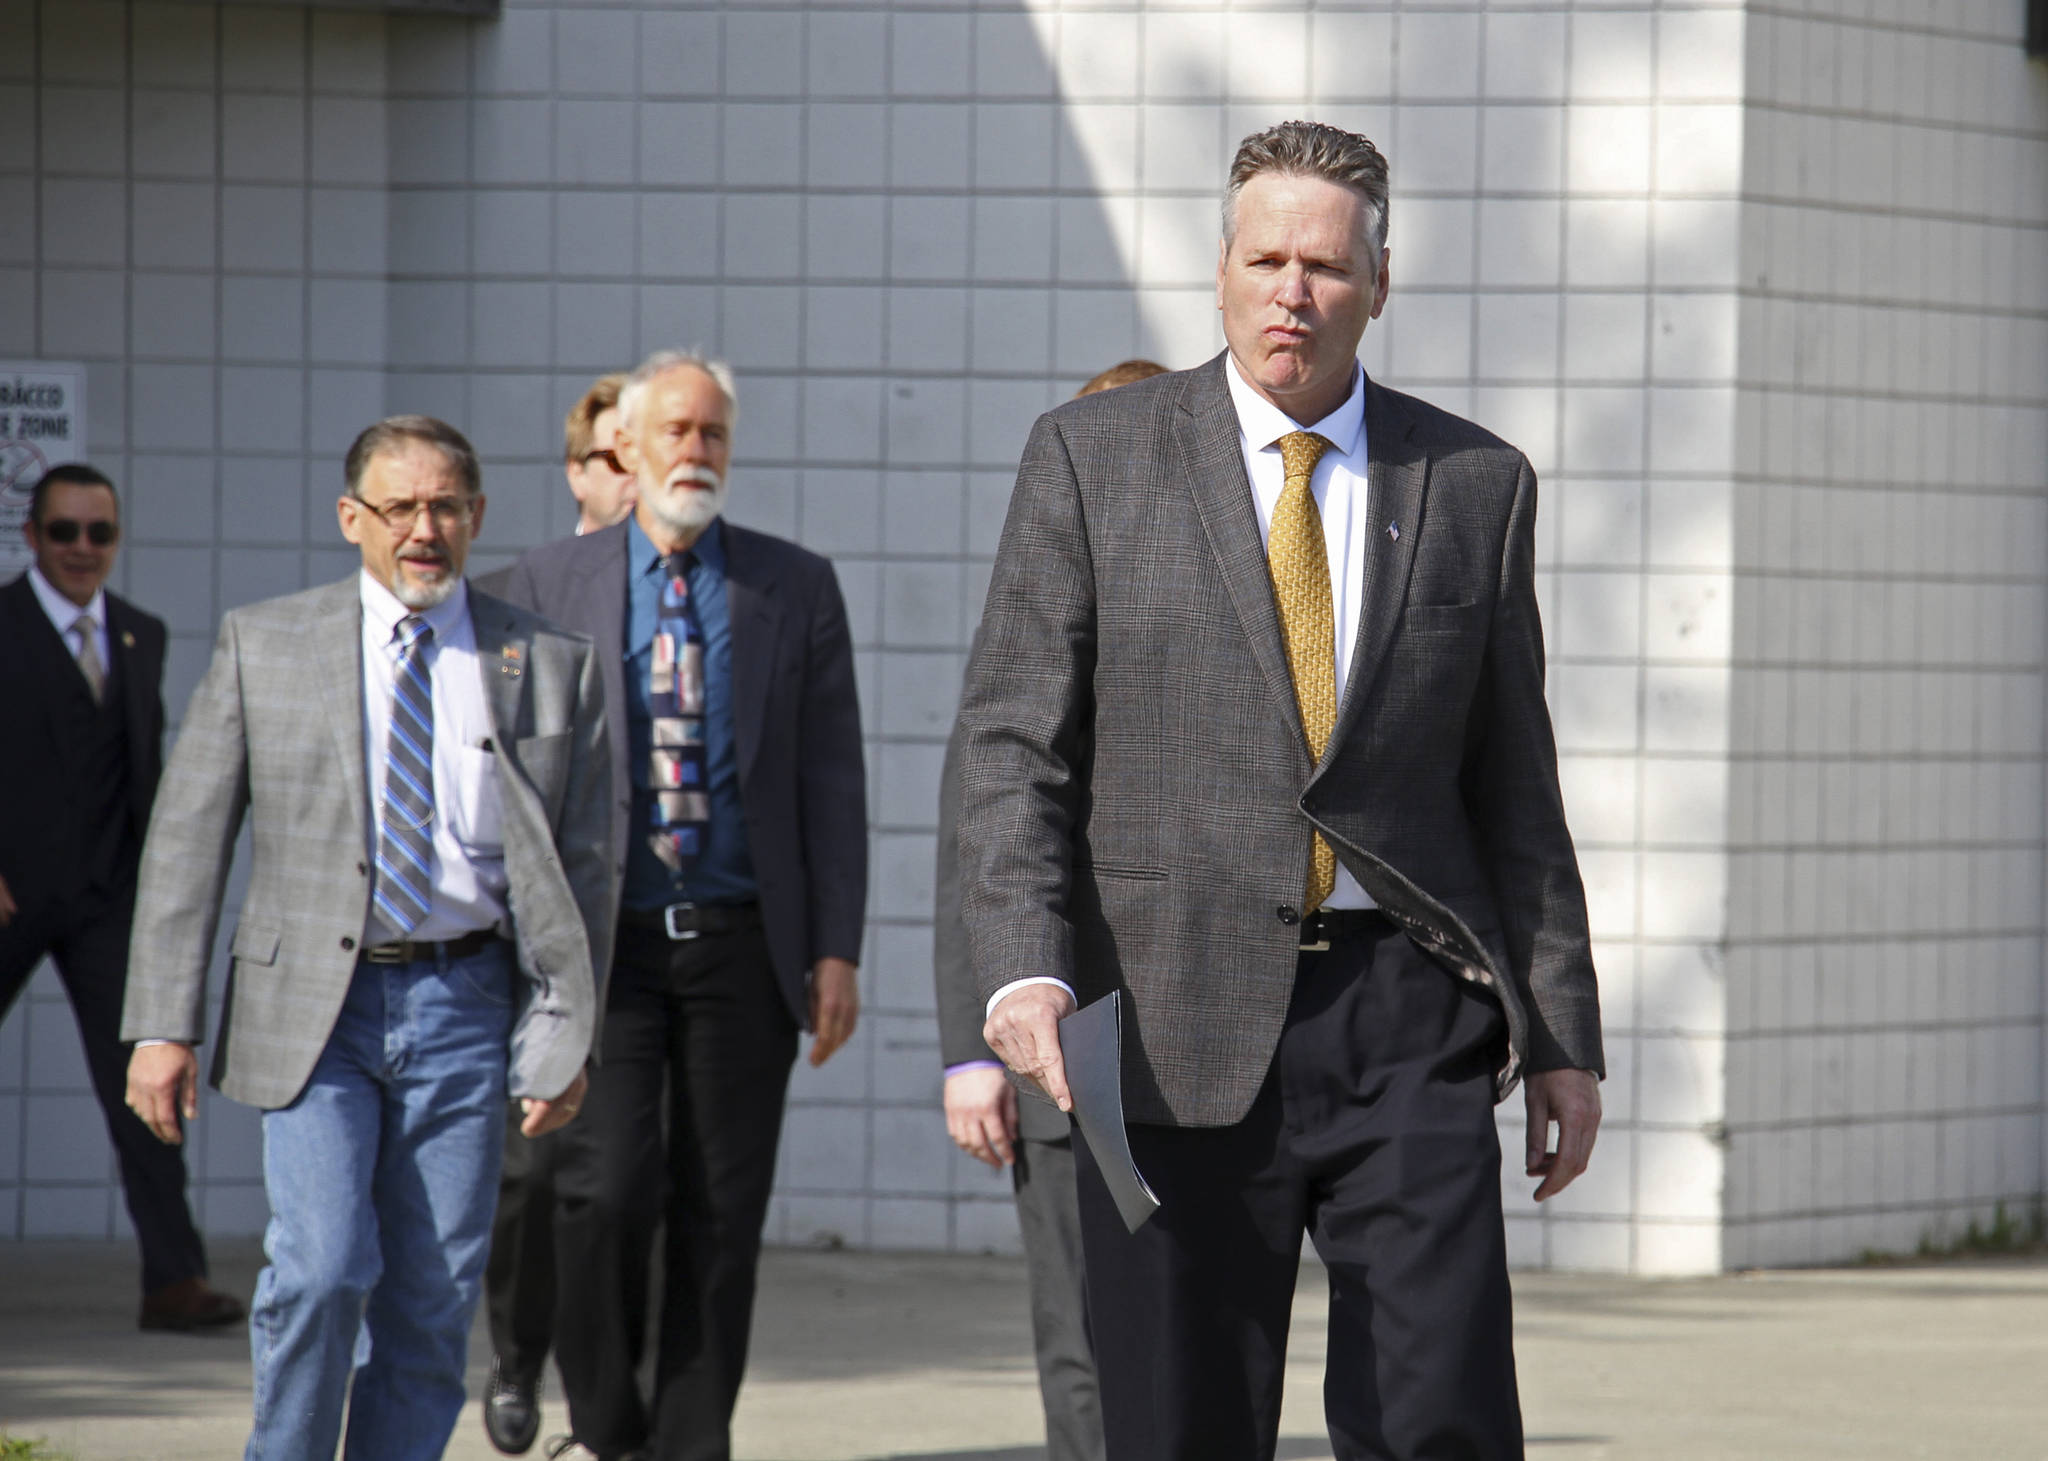 Alaska Gov. Mike Dunleavy walks to the podium at a news conference Friday, June 14, 2019, in Wasilla, Alaska. Dunleavy has called lawmakers into special session July 8 in Wasilla, and his administration gave a tour of the recommended site at Wasilla Middle School to reporters. (AP Photo/Mark Thiessen)